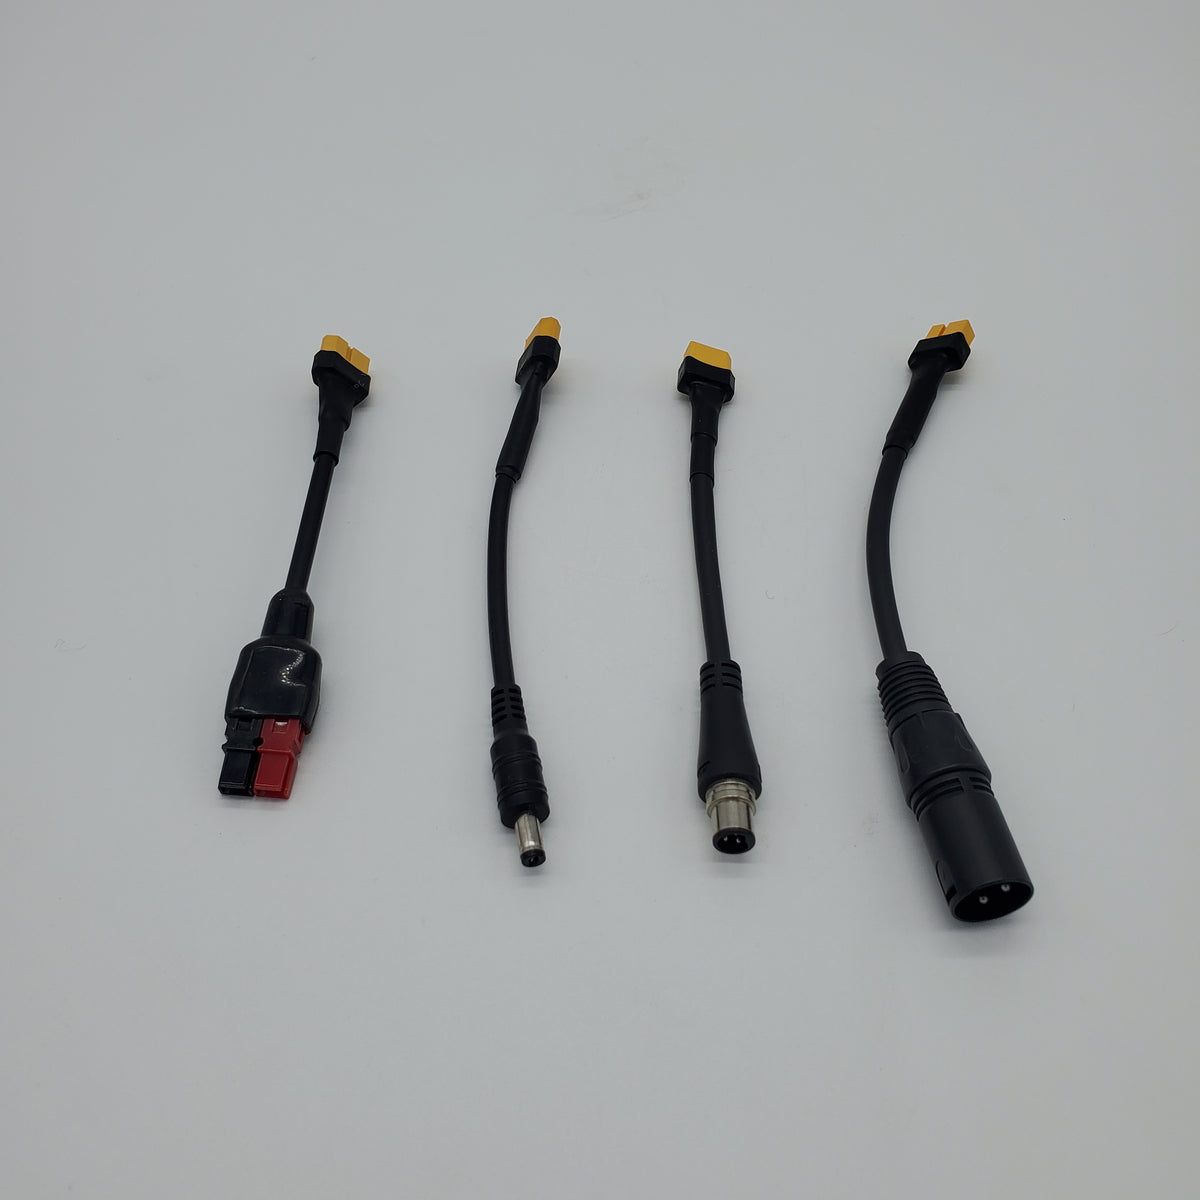 Charger Adapter Variety 4 Pack - Anderson, DC5521 Barrel, Reention 3 Pin, and XLR 3 pin